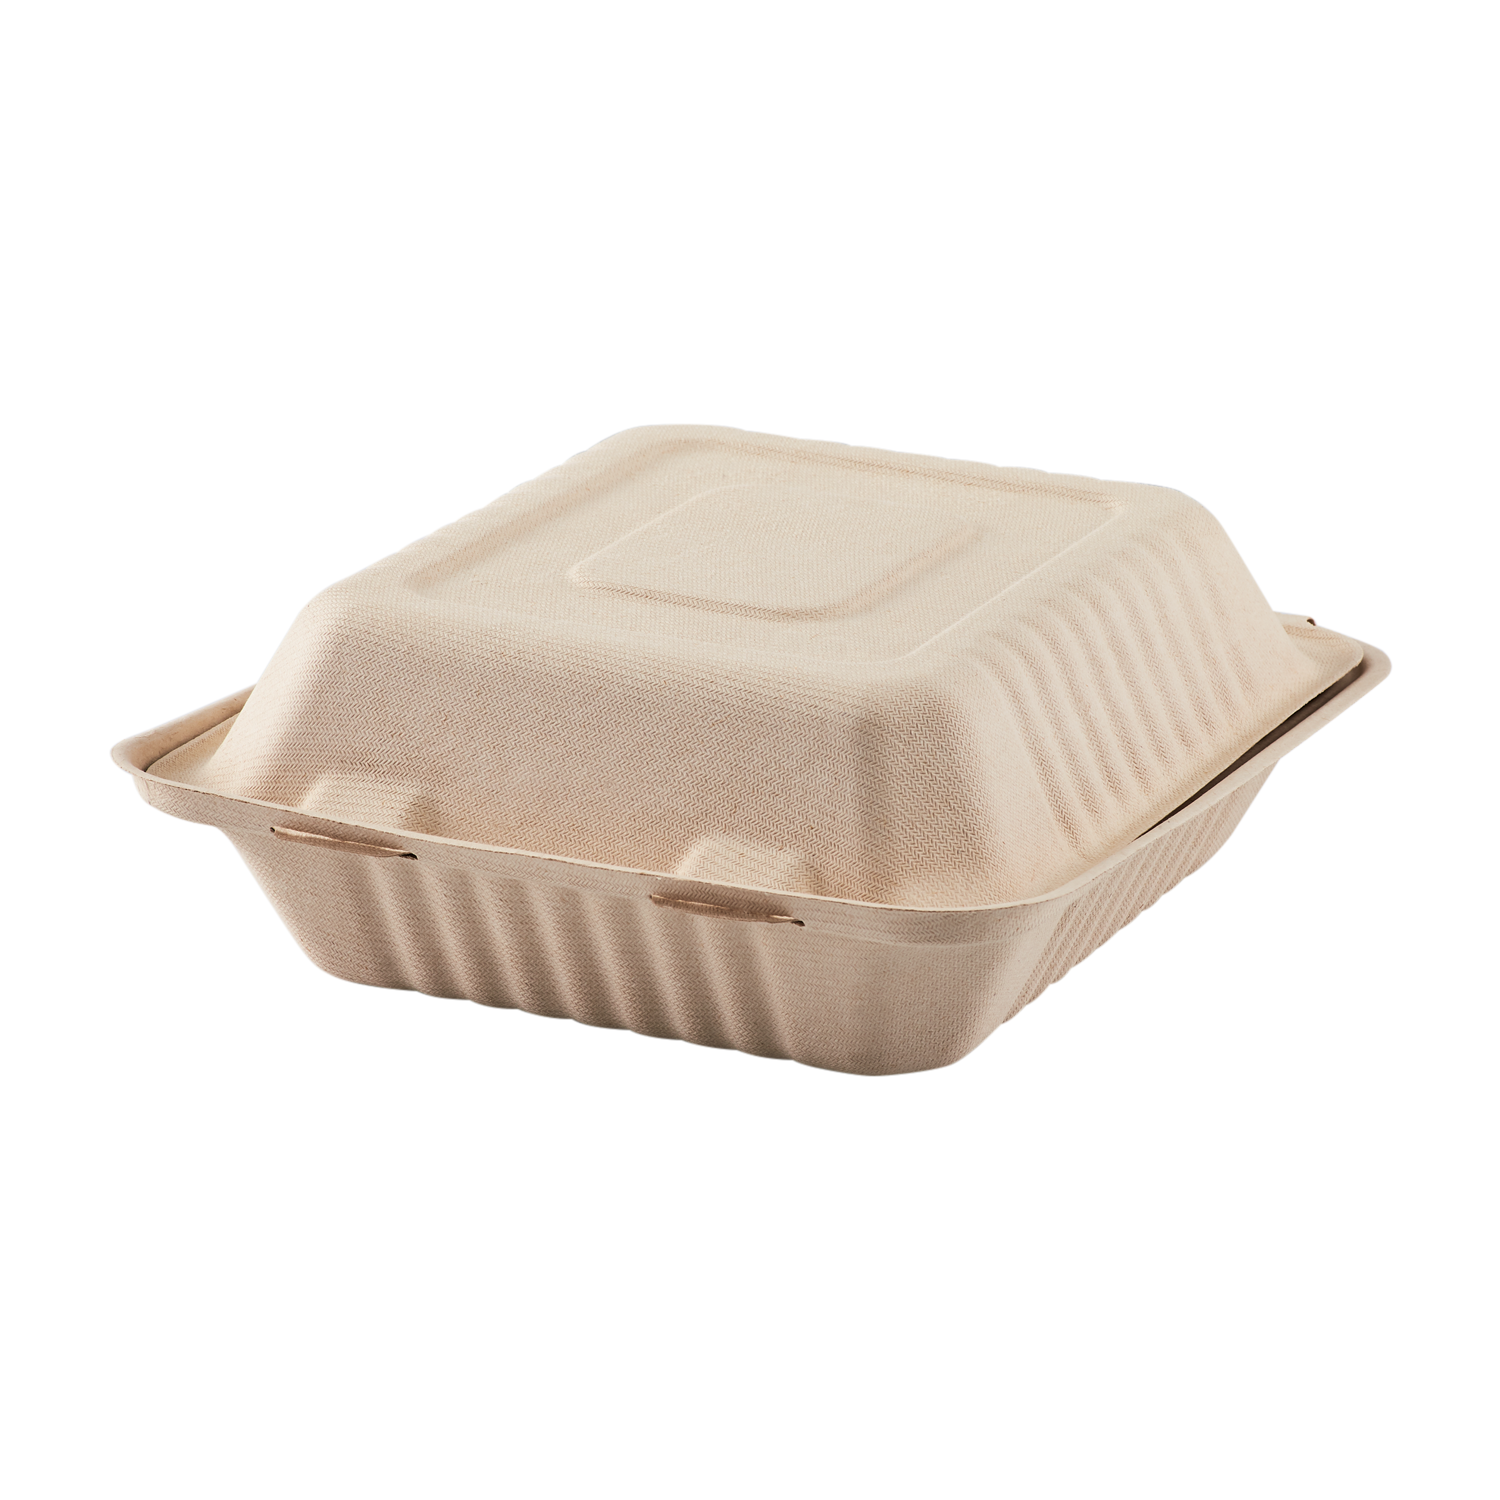 Perfect Stix 100% Compostable Take Out Food Containers. 3 Compartment 9 x 9  Heavy-Duty Quality Disposable Bagasse, Eco-Friendly Biodegradable Made of